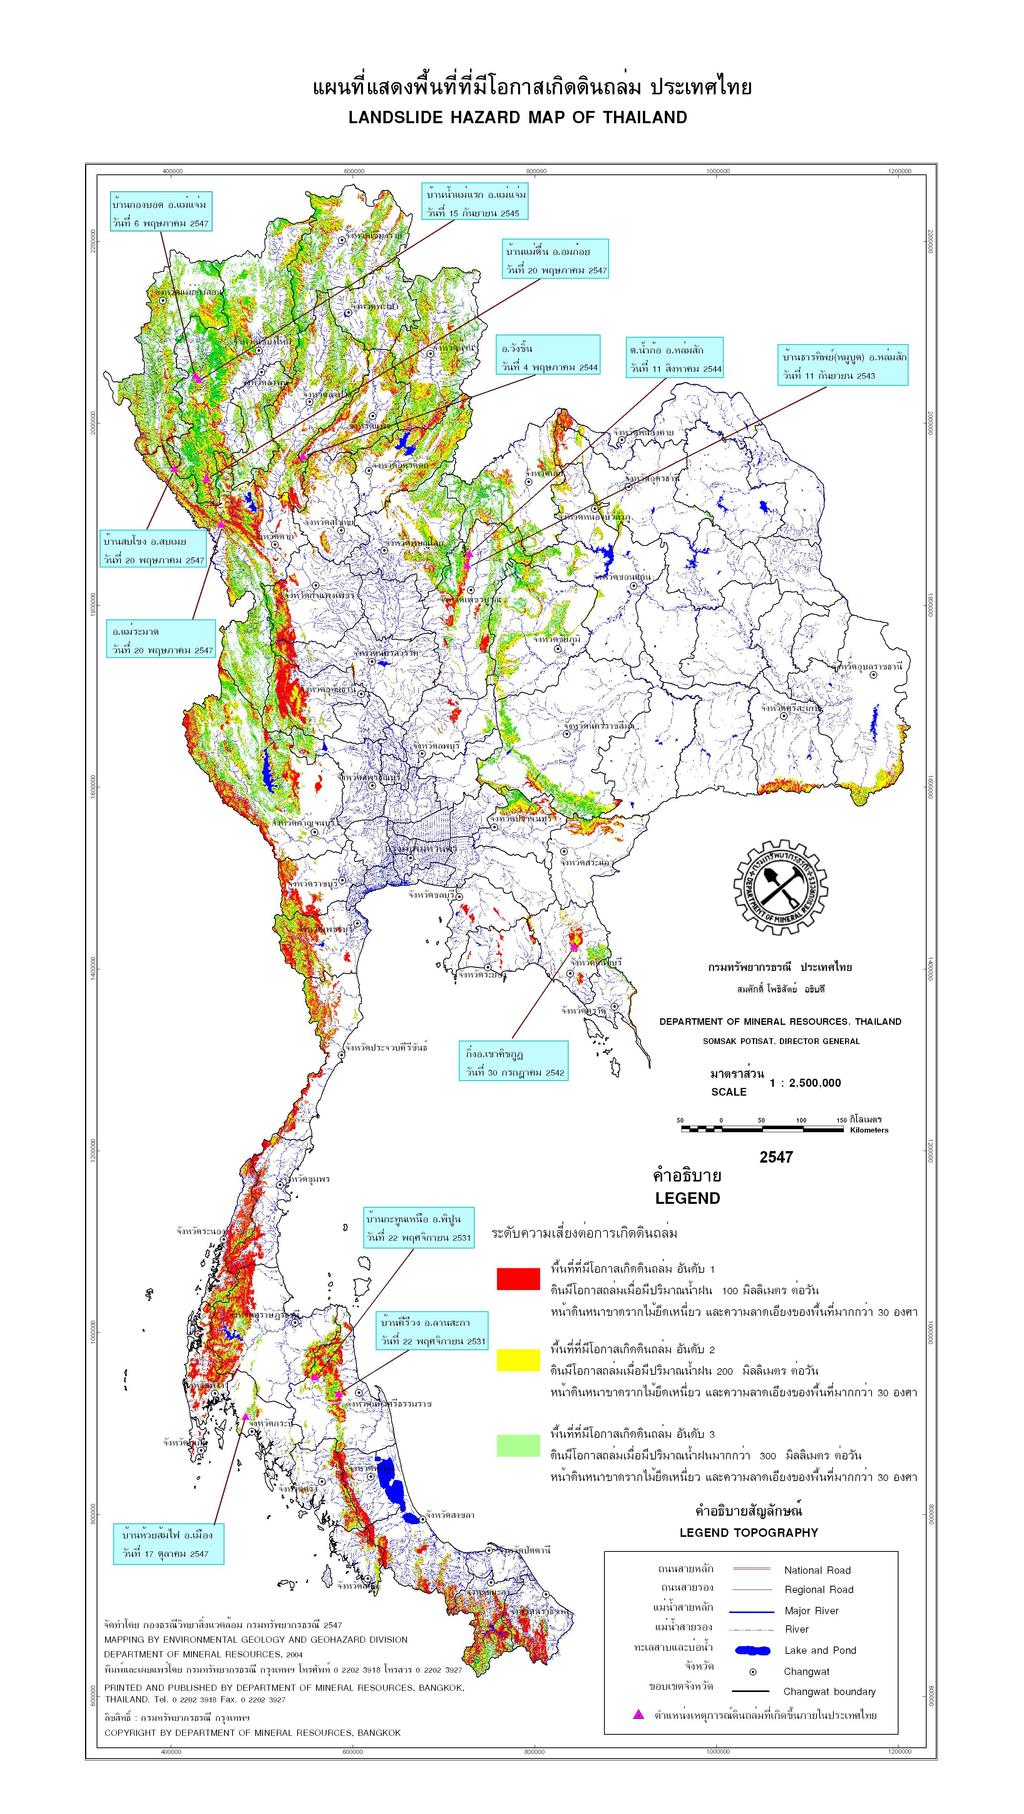 Multi-hazard approach: Synergies Geo- and Meteorological Hazards Meteorological data can be used for the mitigation of Geohazards: e.g. Landslides In Thailand, Landslides can be due to seism occurring in a near country during the rainy season.